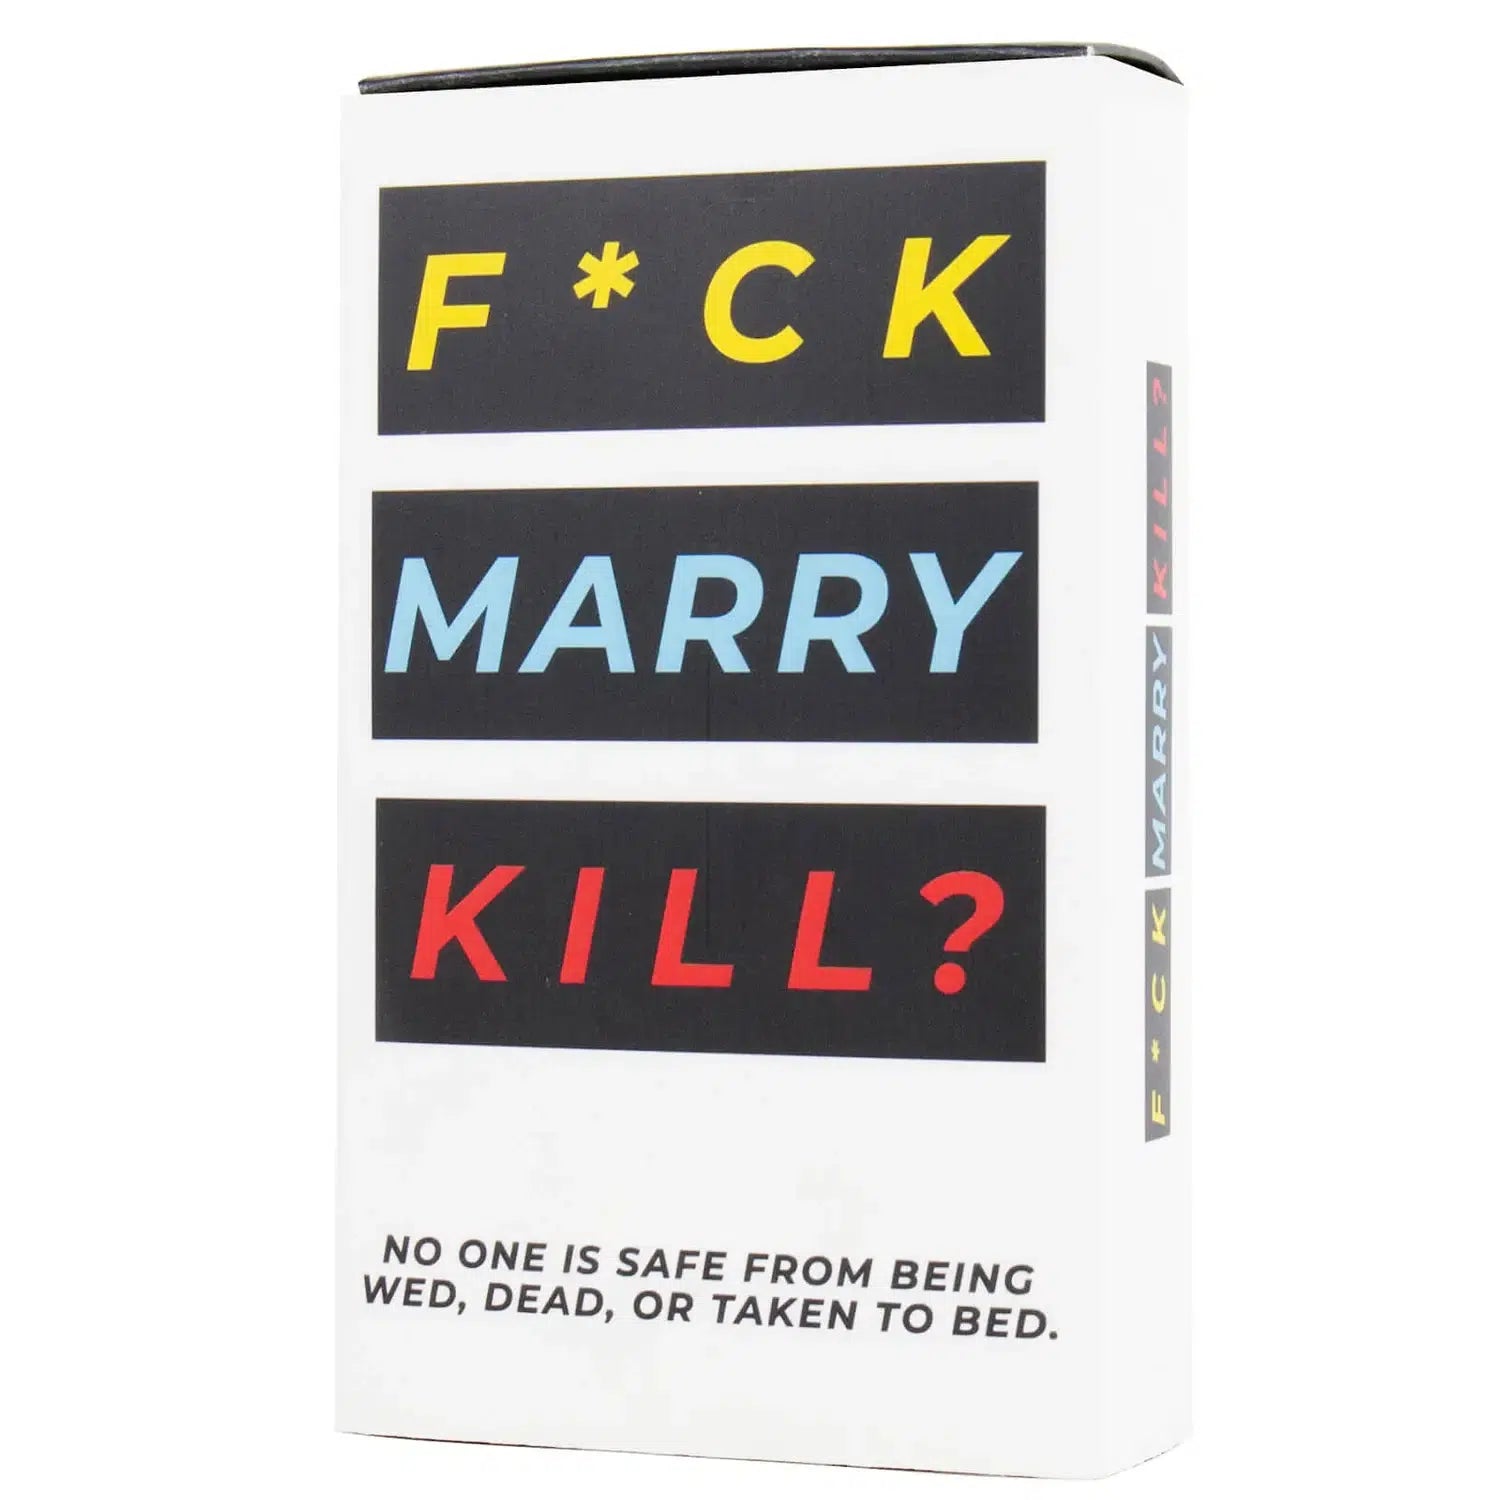 The front of the white box says "F*ck, Marry, Kill?"